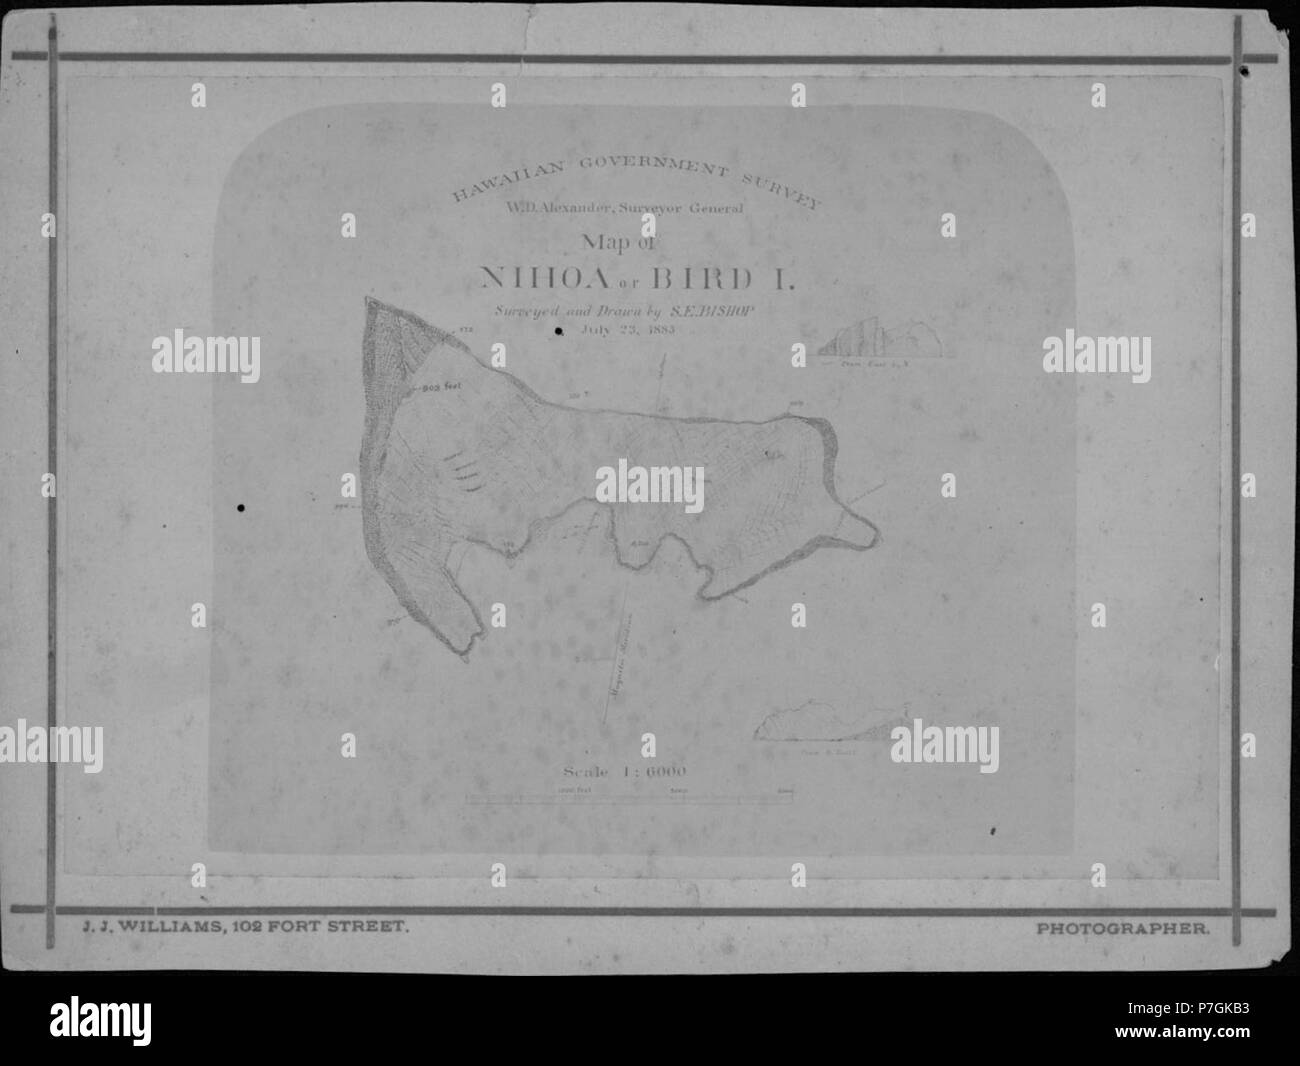 English: Hawaiian Government Survey. W. D. Alexander, Surveyor General. Map of Nihoa or Bird Island. Surveyed and Drawn by S. E. Bishop. July 23, 1883. not given 4 1883 Map of Nihoa or Bird Islands, photograph by J. J. Williams (PP-45-10-005) Stock Photo